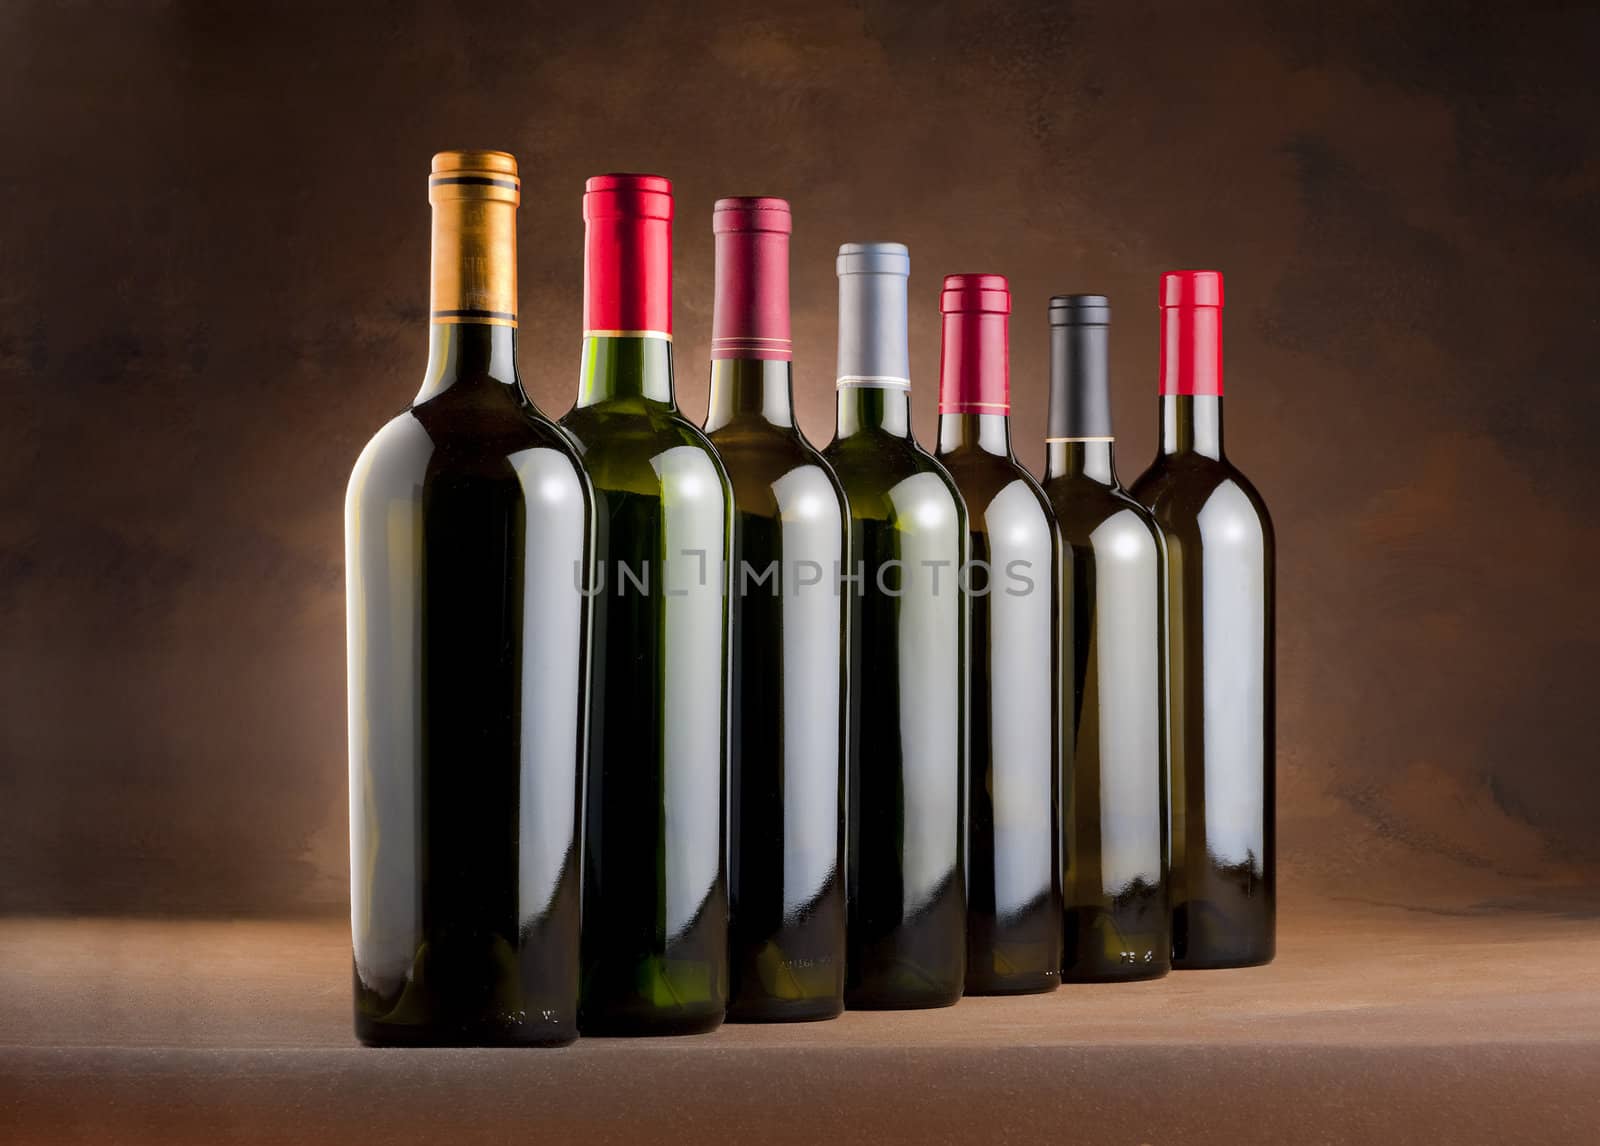 Red wine bottles in a row with empty labels on a mottled canvas background